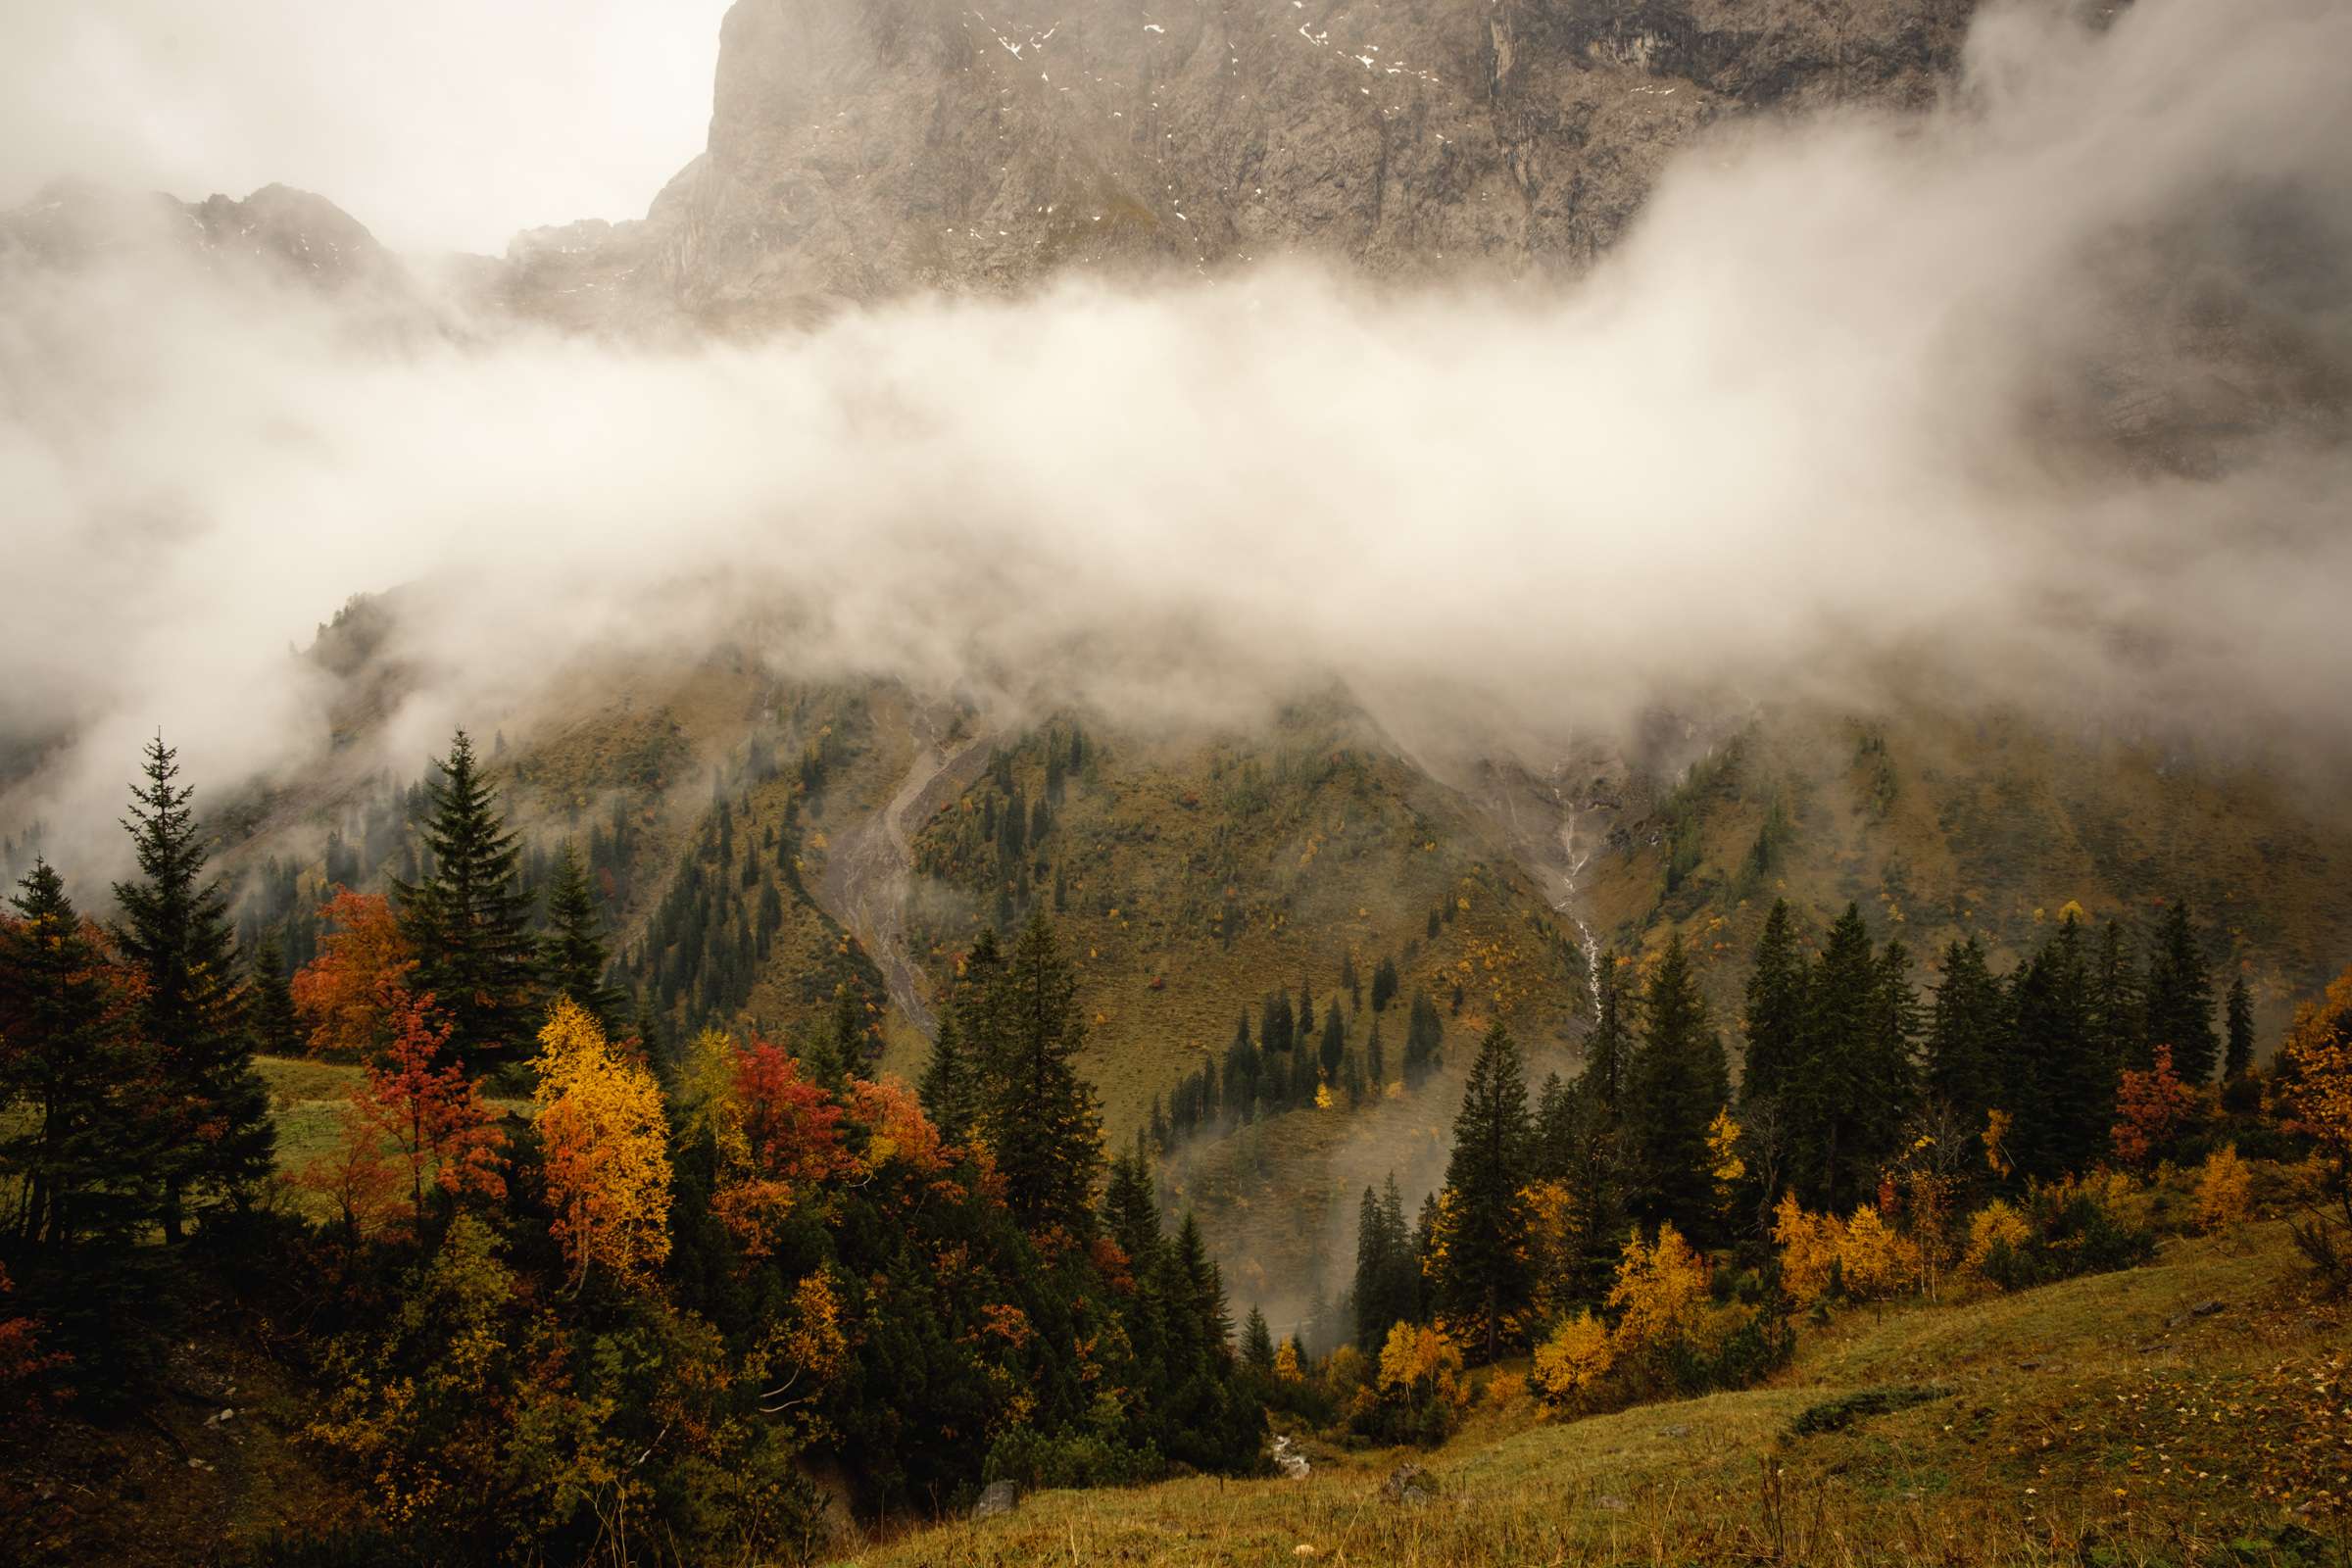 Clouds and waterfalls engulfing the Karwendel valley